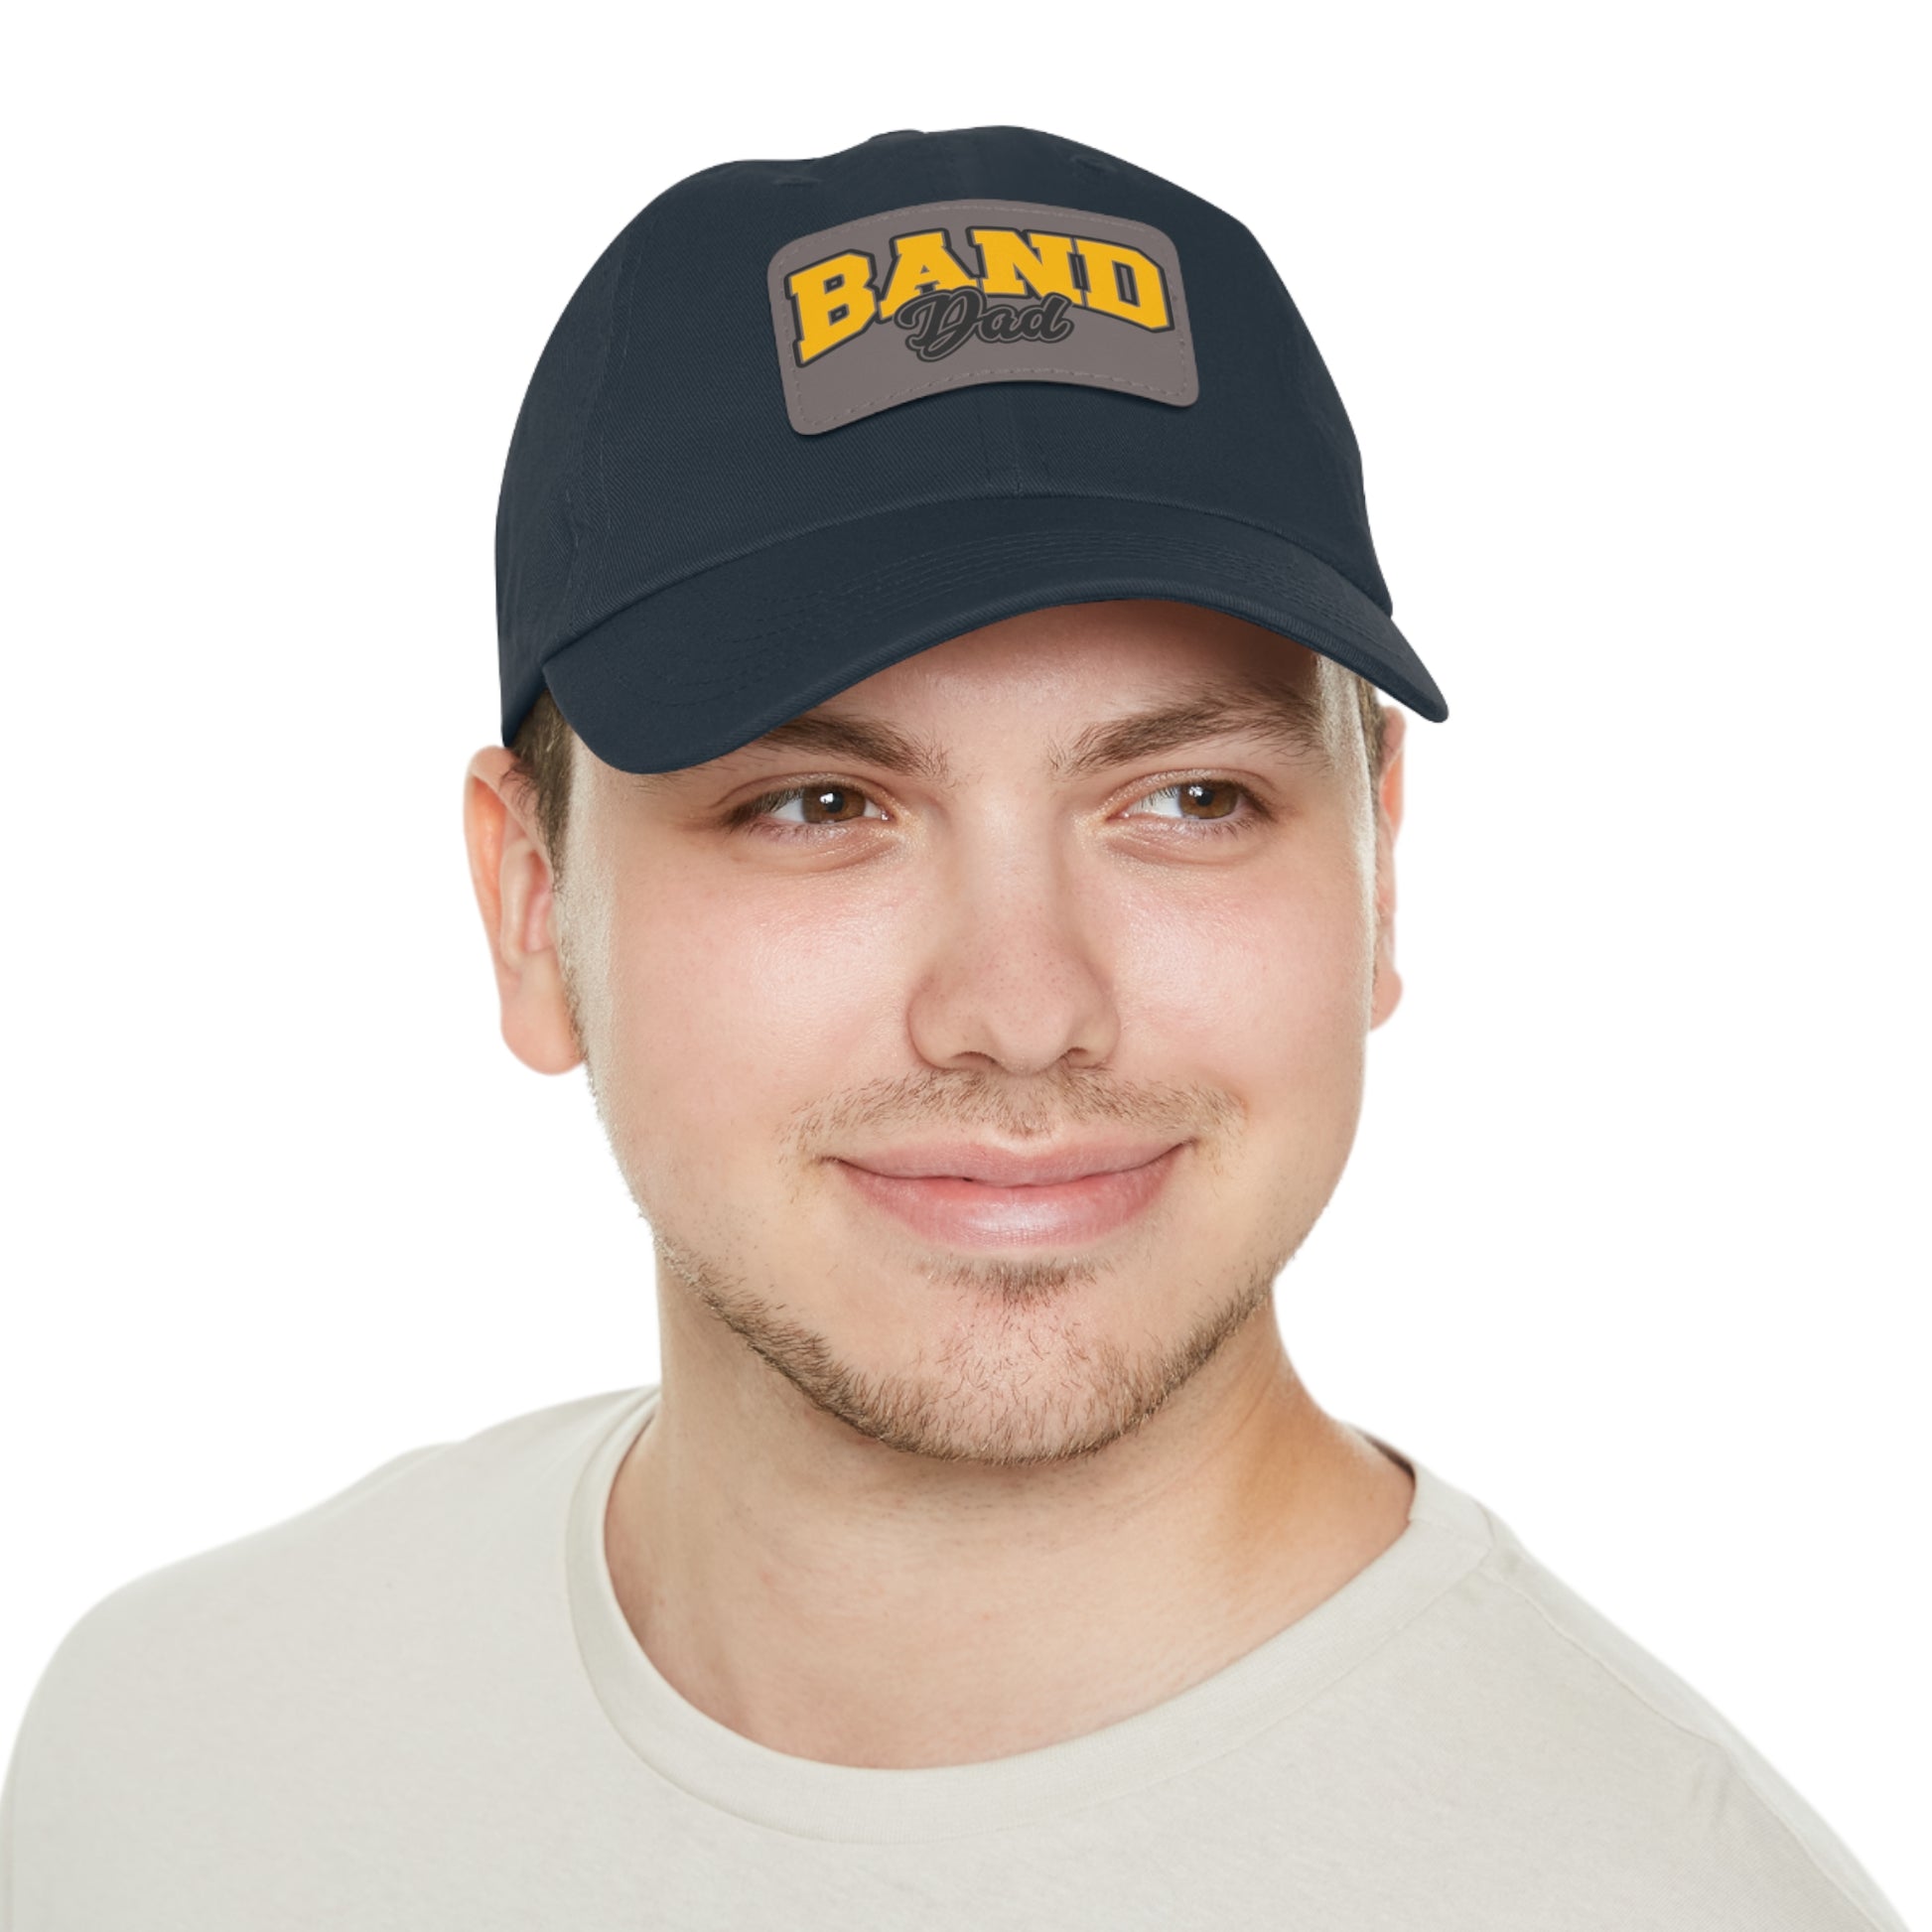 band dad hat